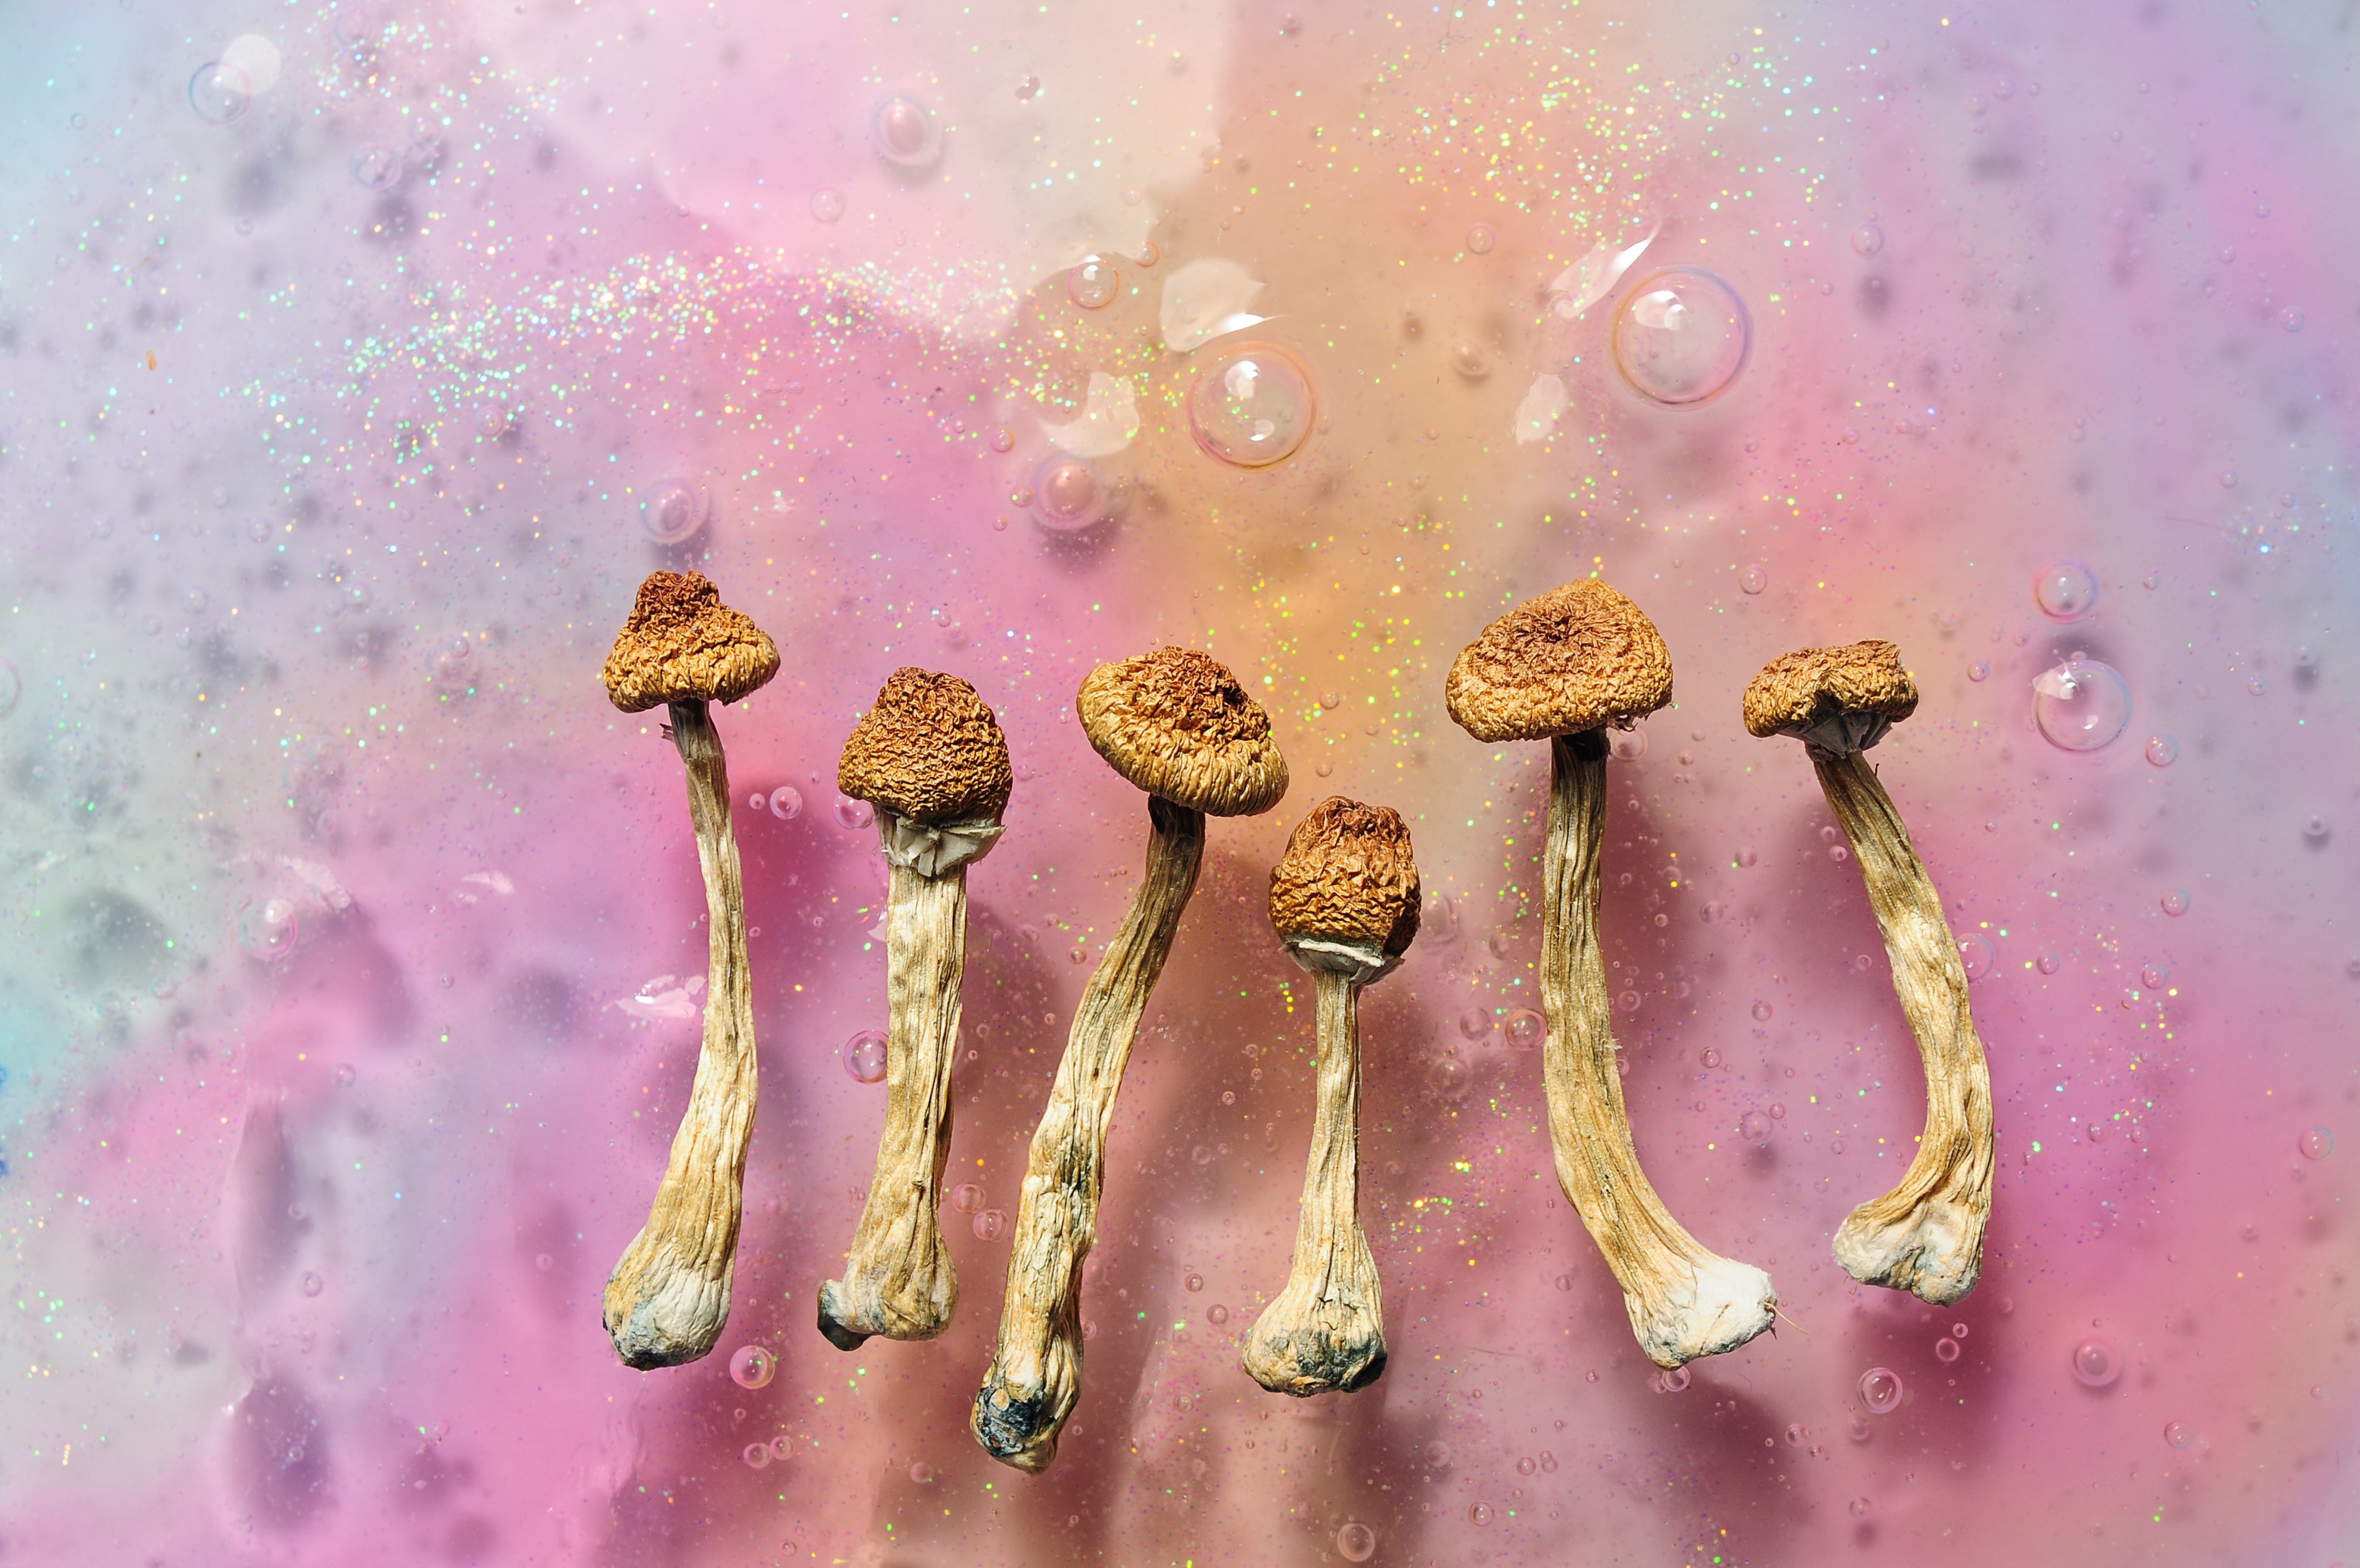 Canada Regulators Ease Access to Psychedelic Drugs